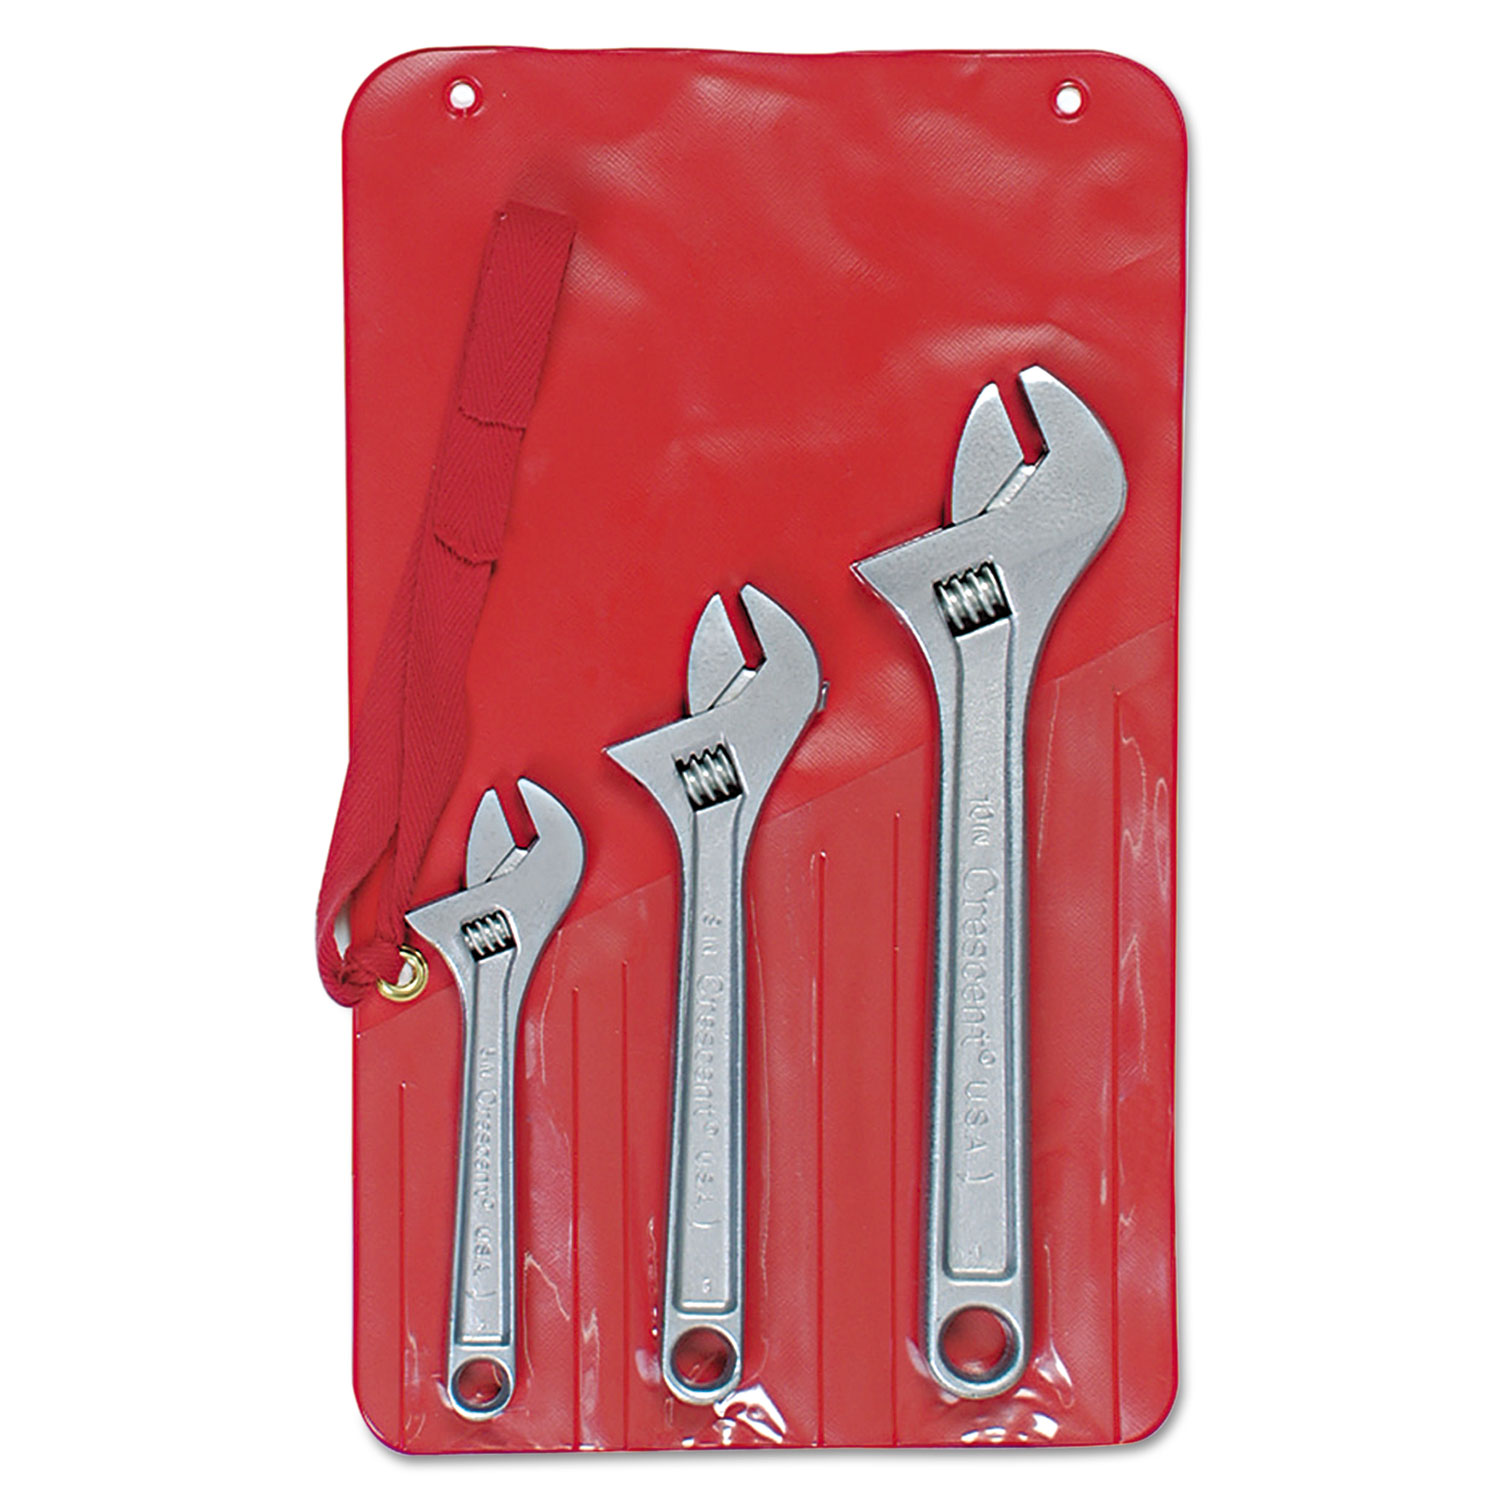 Crescent Three-Piece Adjustable Wrench Set, 6, 8, 10 Lengths, Chrome